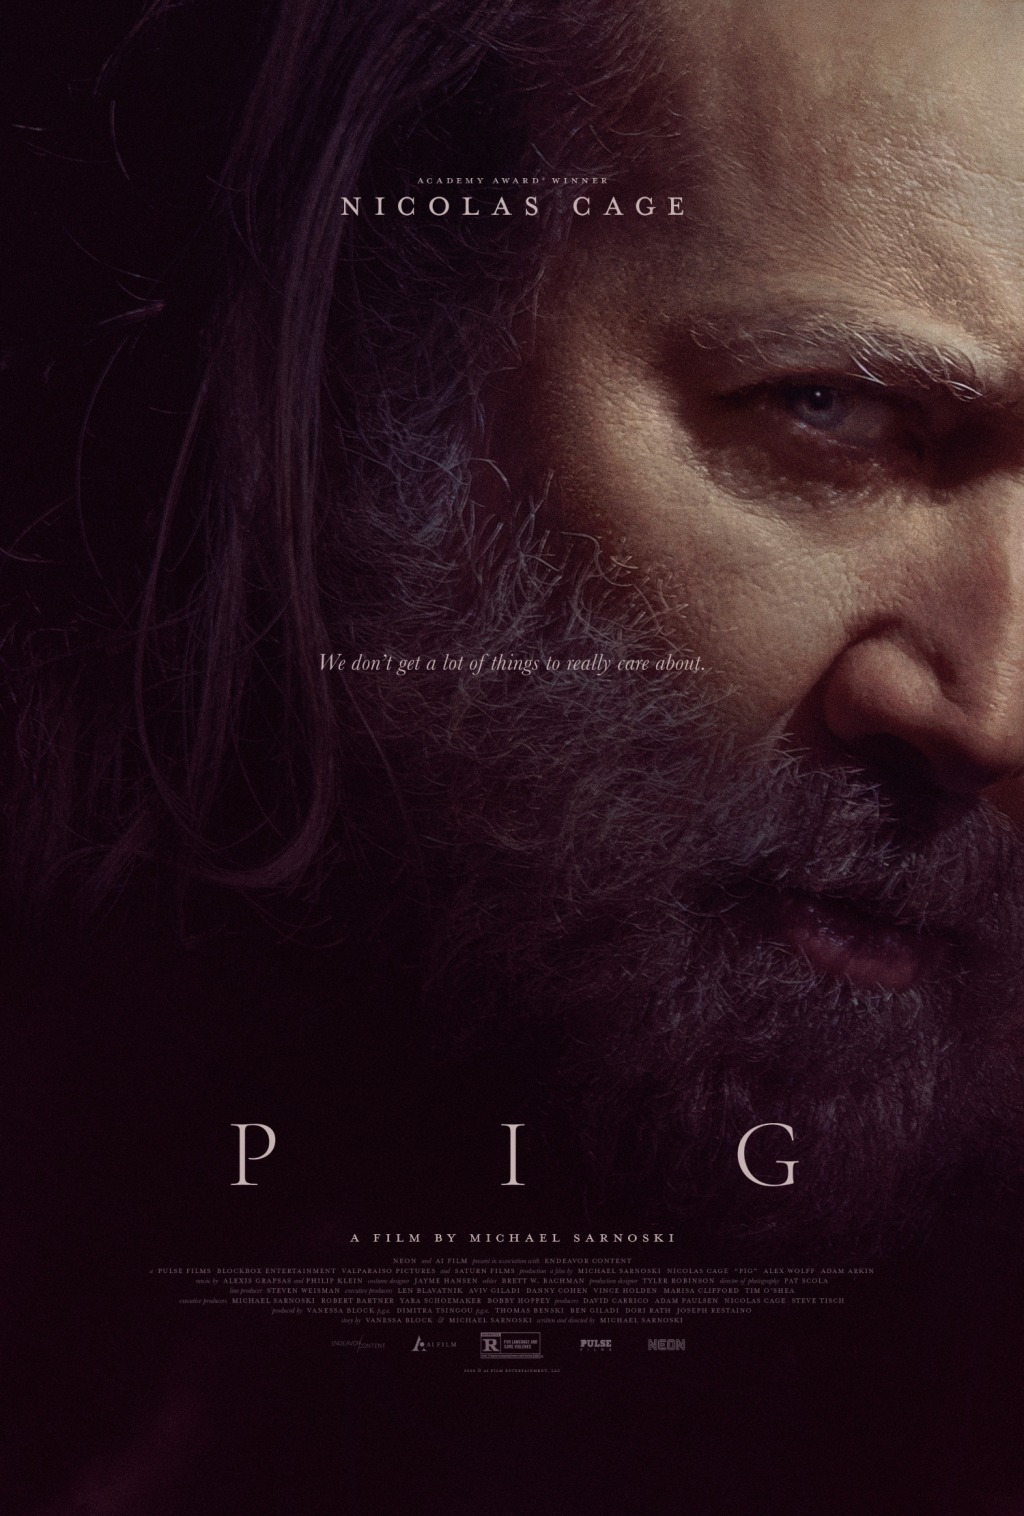 Pig (2021) Movie Review: A profoundly deep journey on loss and the meaning of life